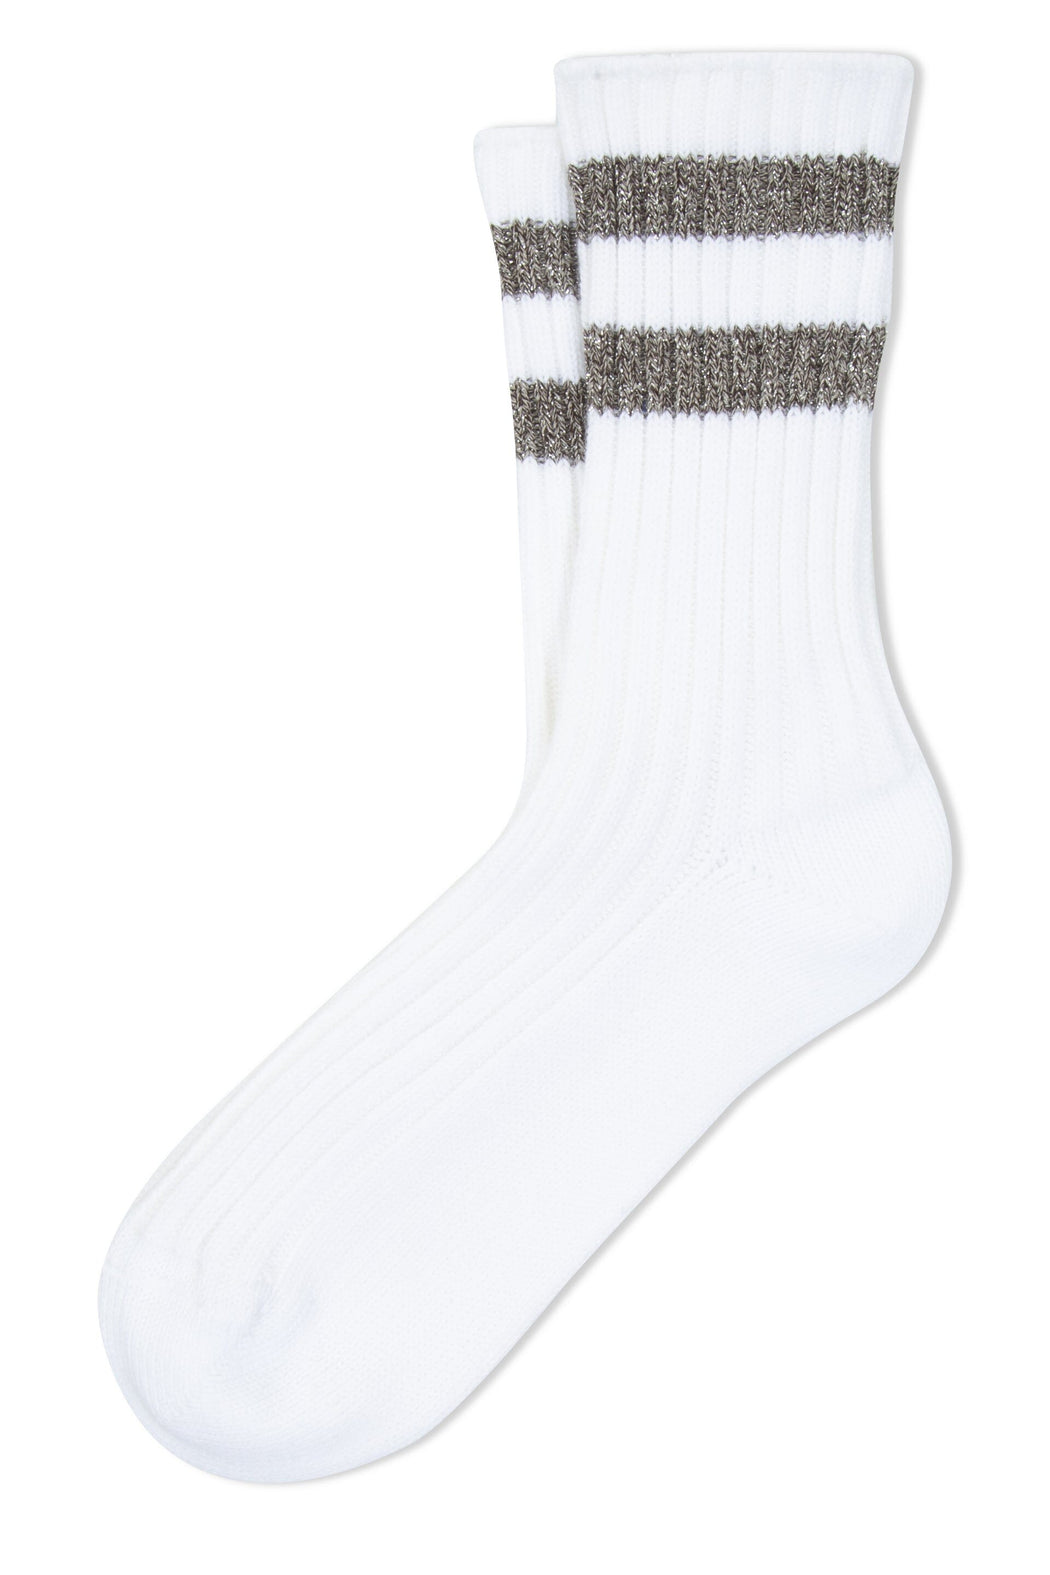 ANT - NYSTED K81 Socks -Med Gray Women's Accessories CAPPELLETTO 1948